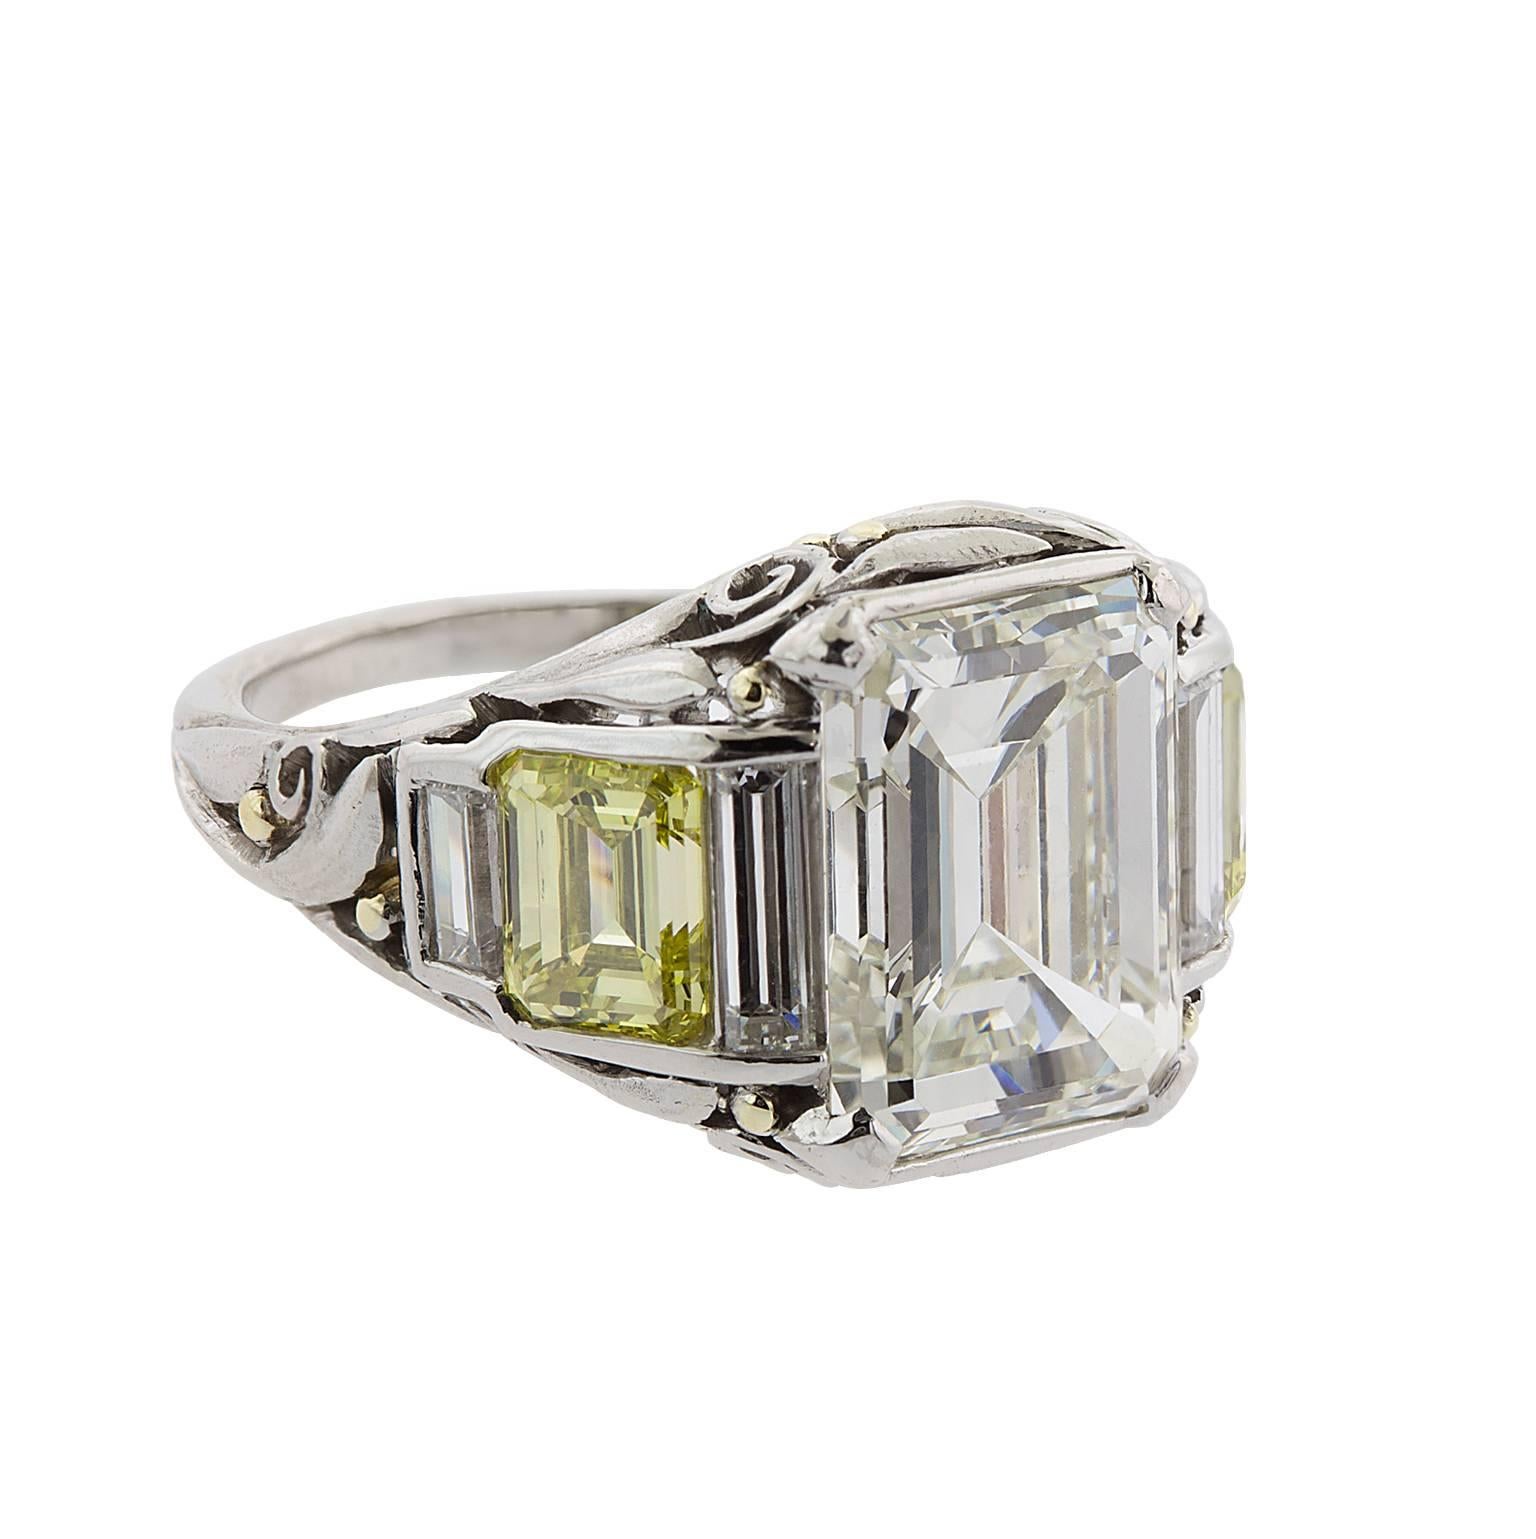 5.01 carat emerald cut diamond with two emerald cut fancy yellow diamonds, and four baguettes set in platinum and 18 karat yellow gold.  The center diamond is graded by GIA as L color, VS1 clarity.  Report 2185247956.  The two fancy yellow diamonds